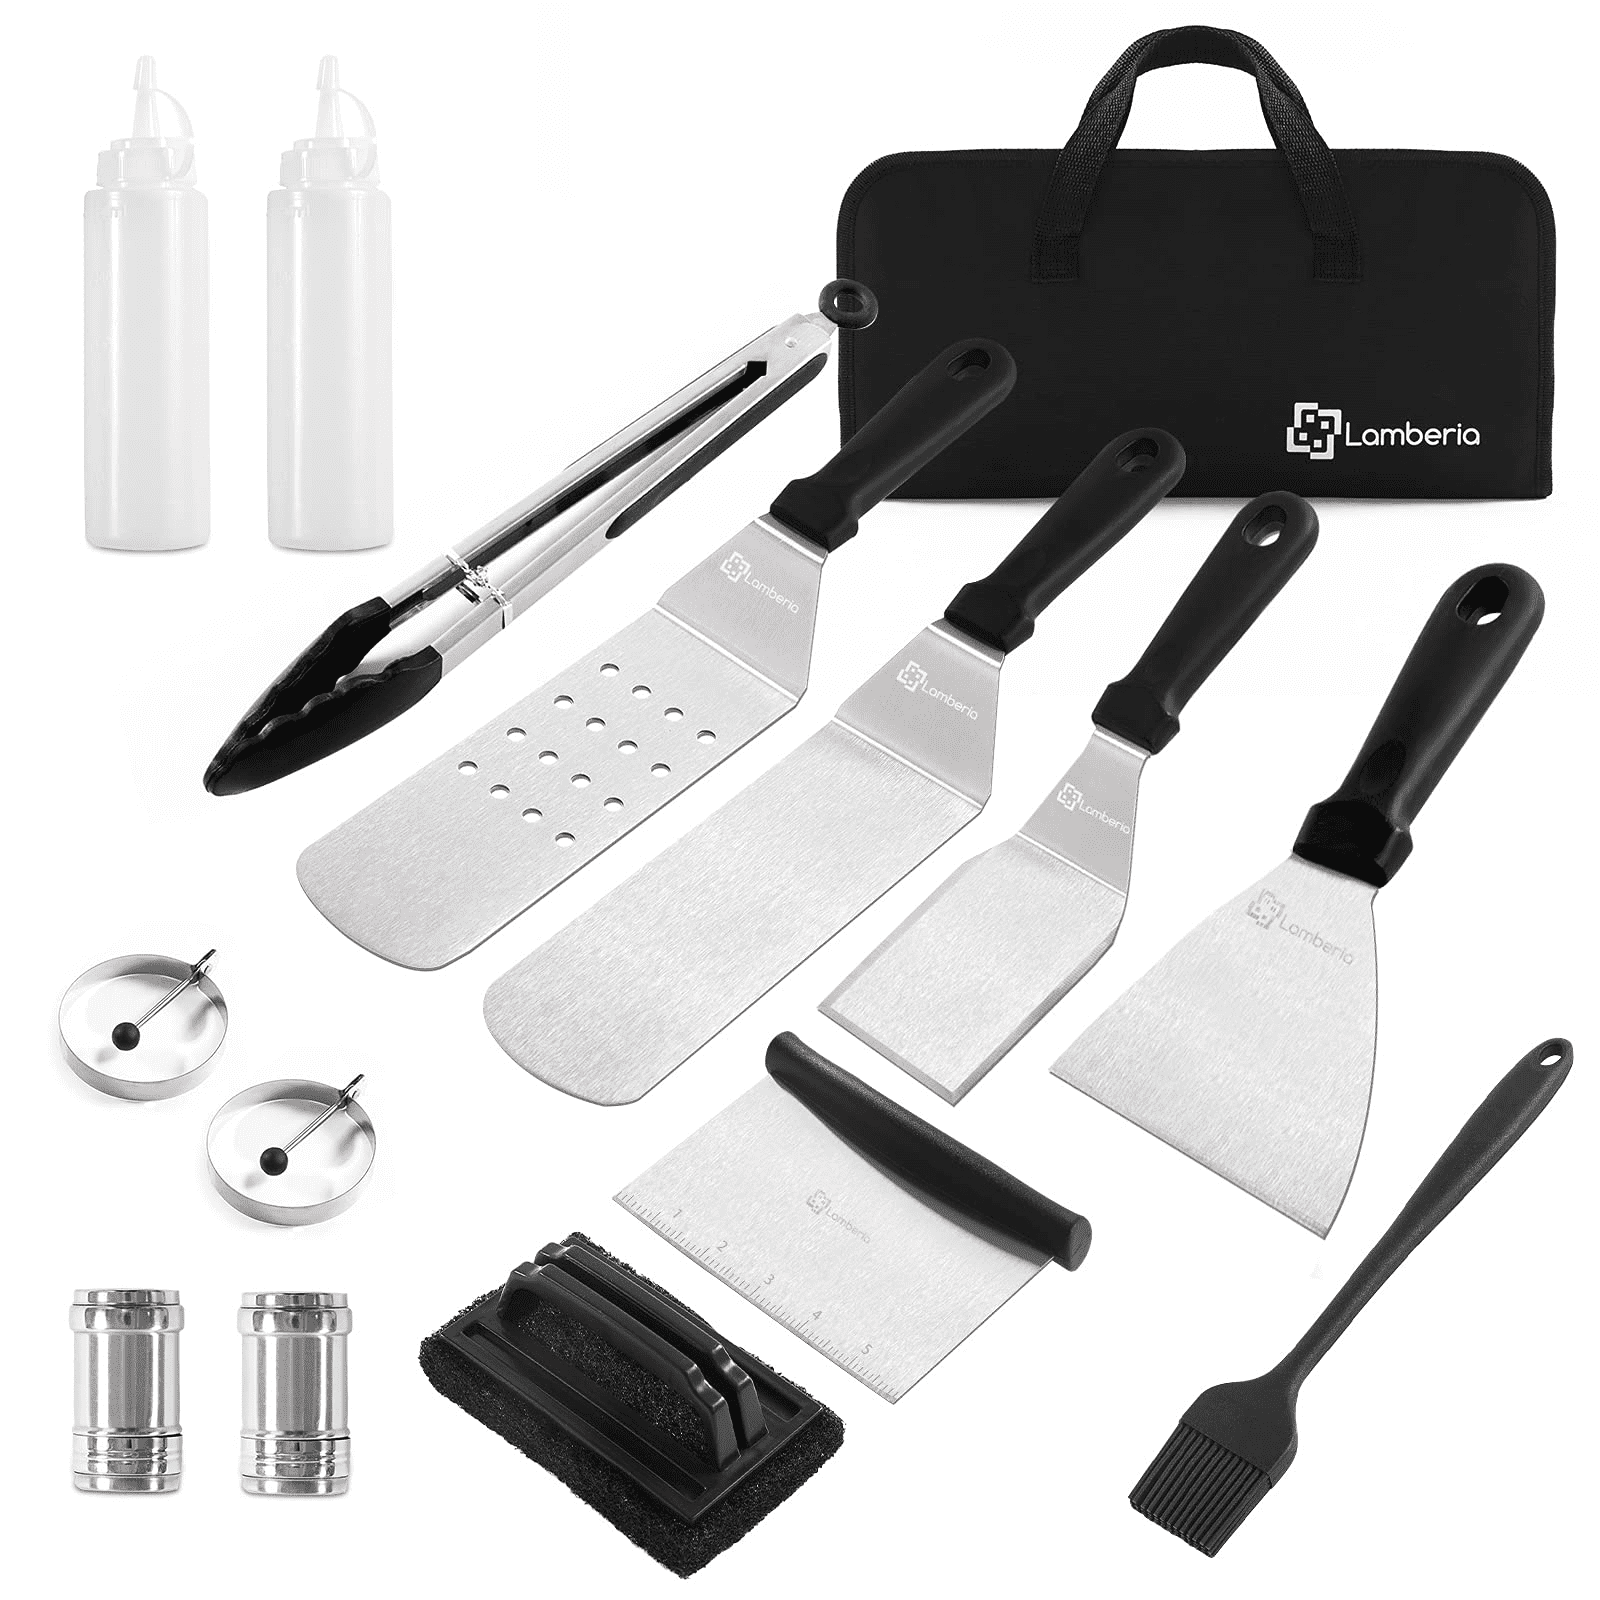 15 Piece Tainless Steel Grilling Utensils Set With BBQ Griddle Accessories Kit 